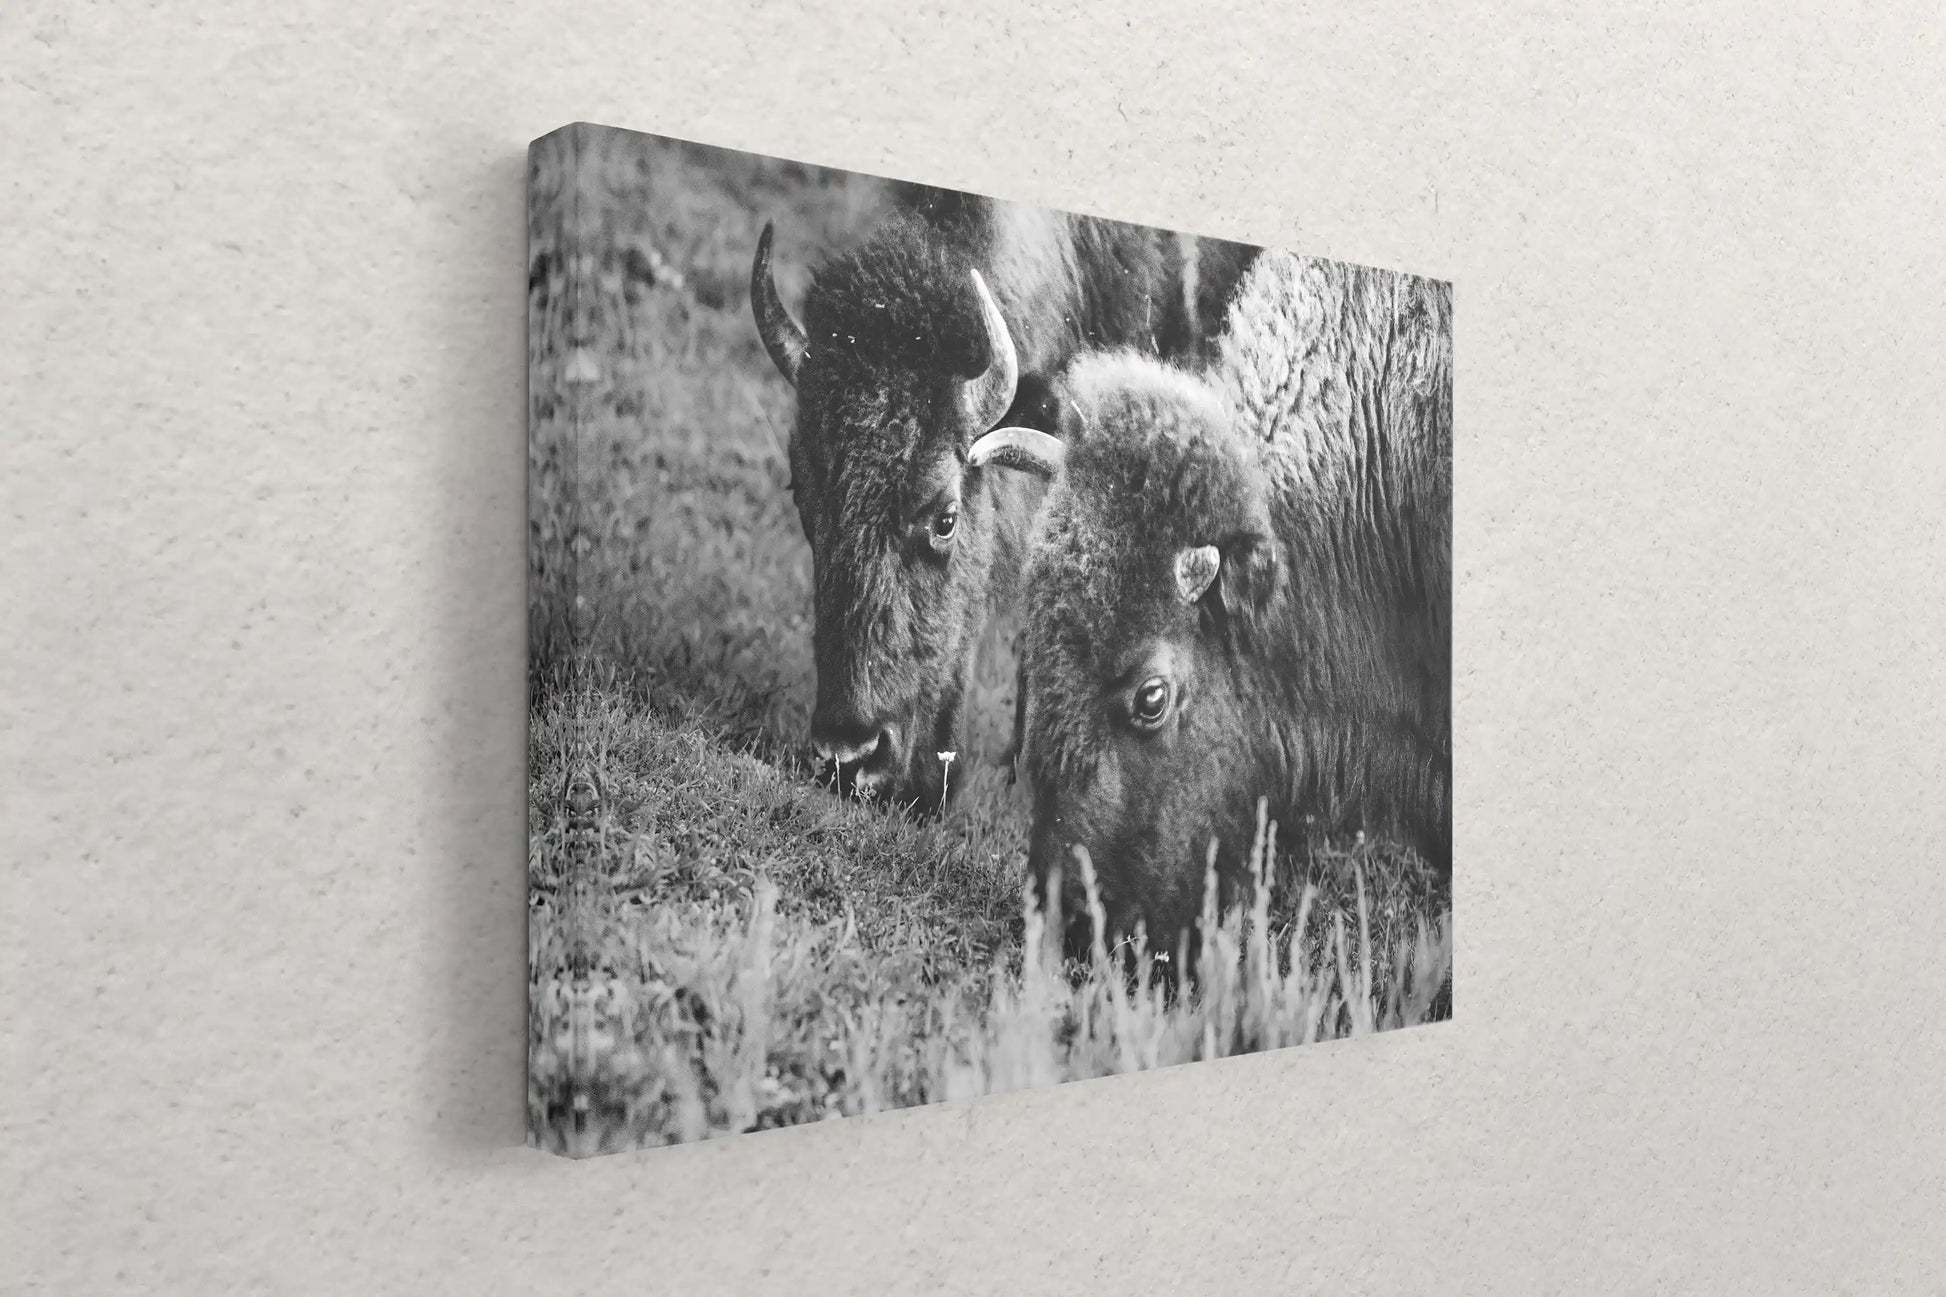 A side view of a canvas print leaning against a wall, featuring a close-up black and white photograph of bison grazing.